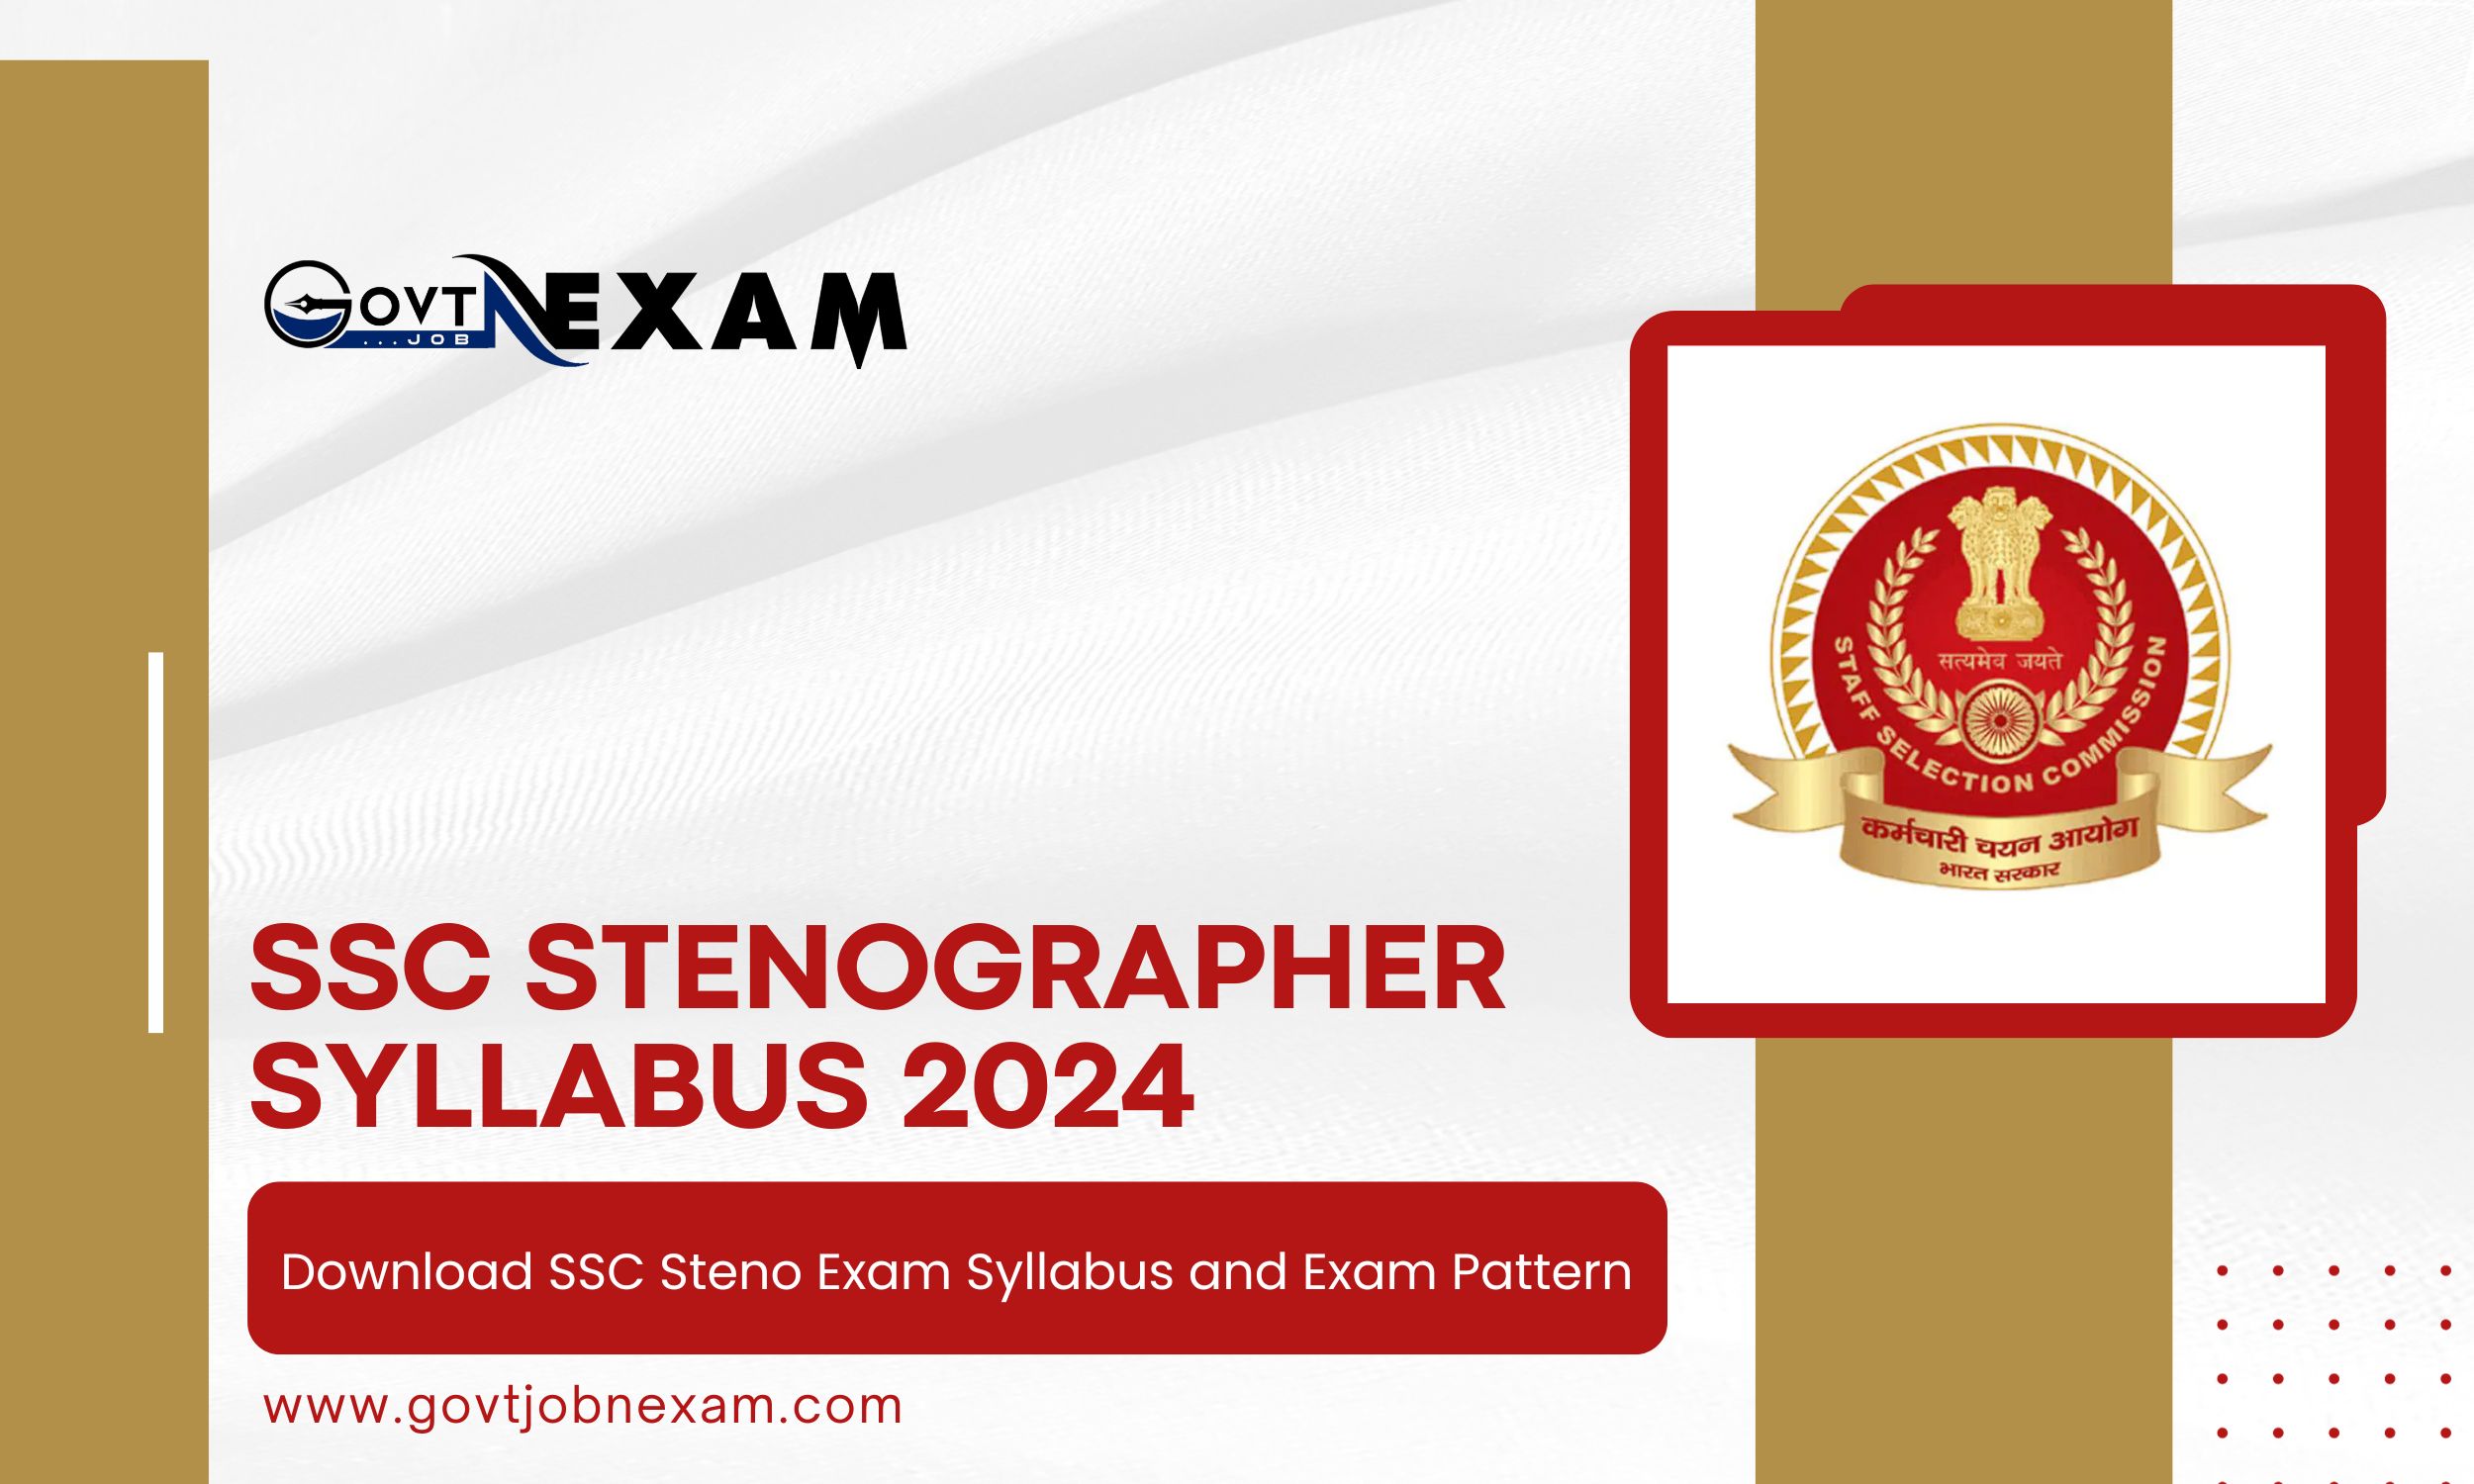 You are currently viewing SSC Stenographer Syllabus 2024: Download SSC Steno Exam Syllabus and Exam Pattern